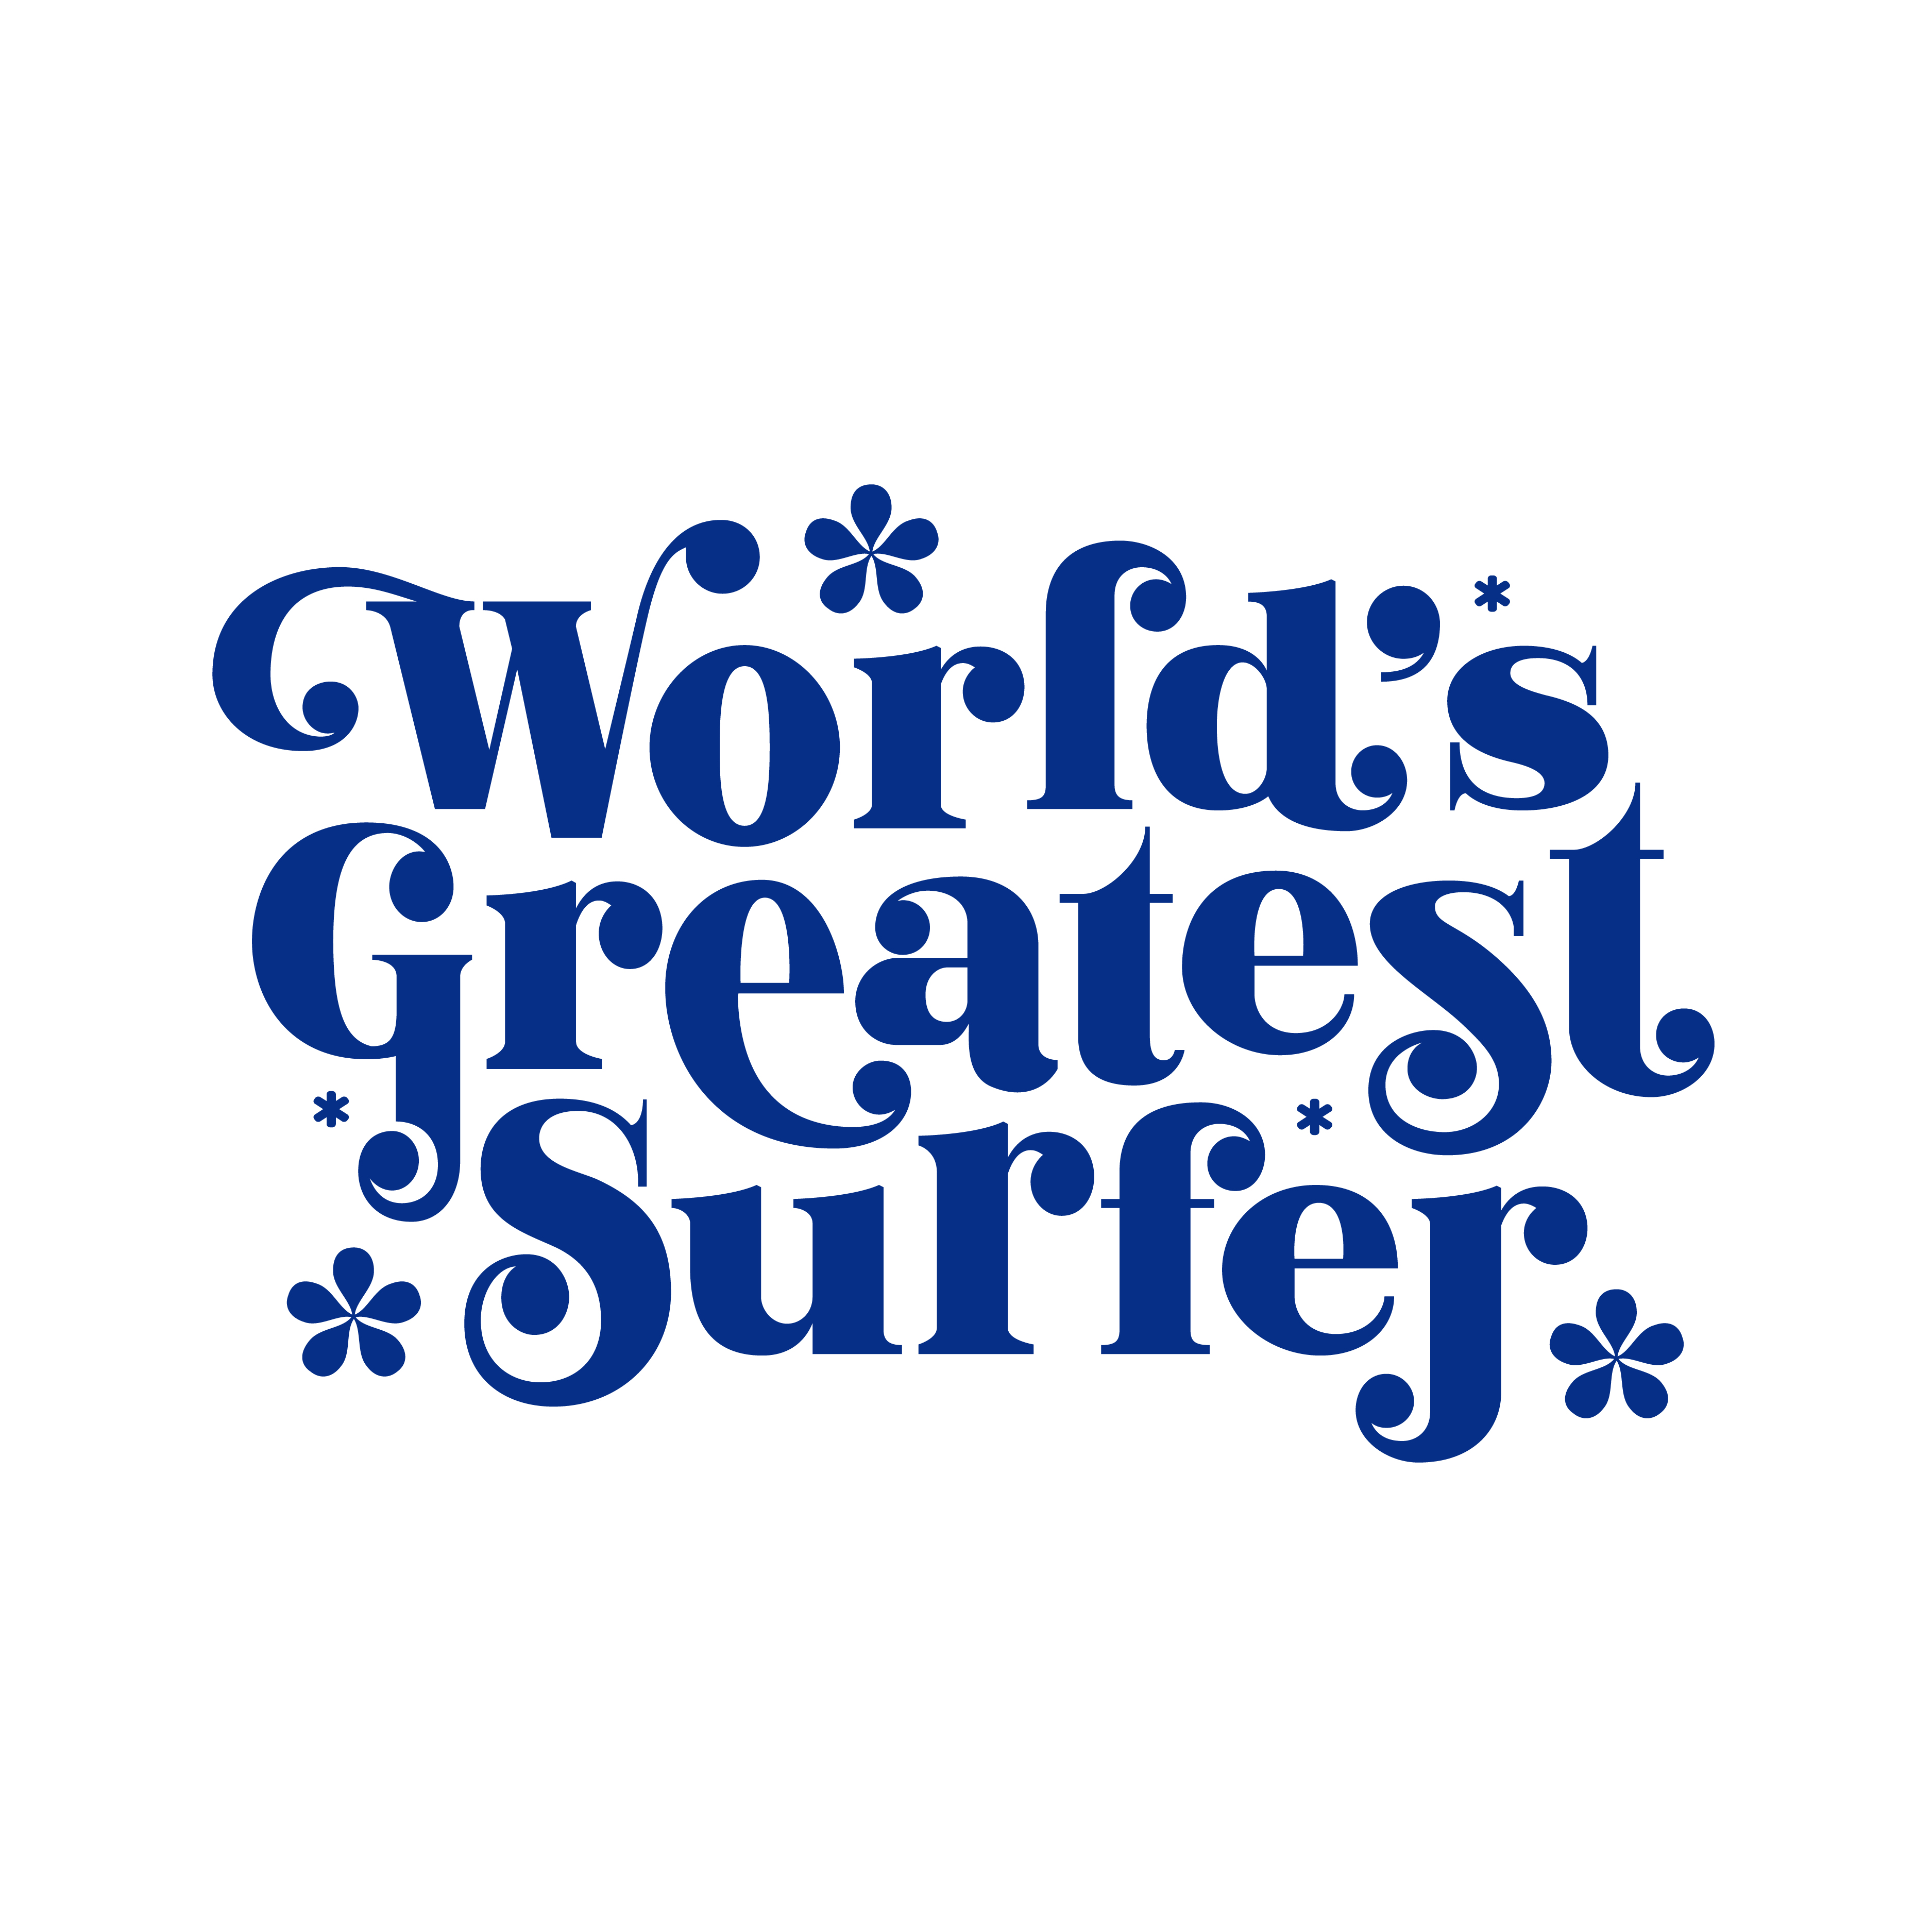 Worlds Greatest Surfer logo design by logo designer Caribou Creative for your inspiration and for the worlds largest logo competition